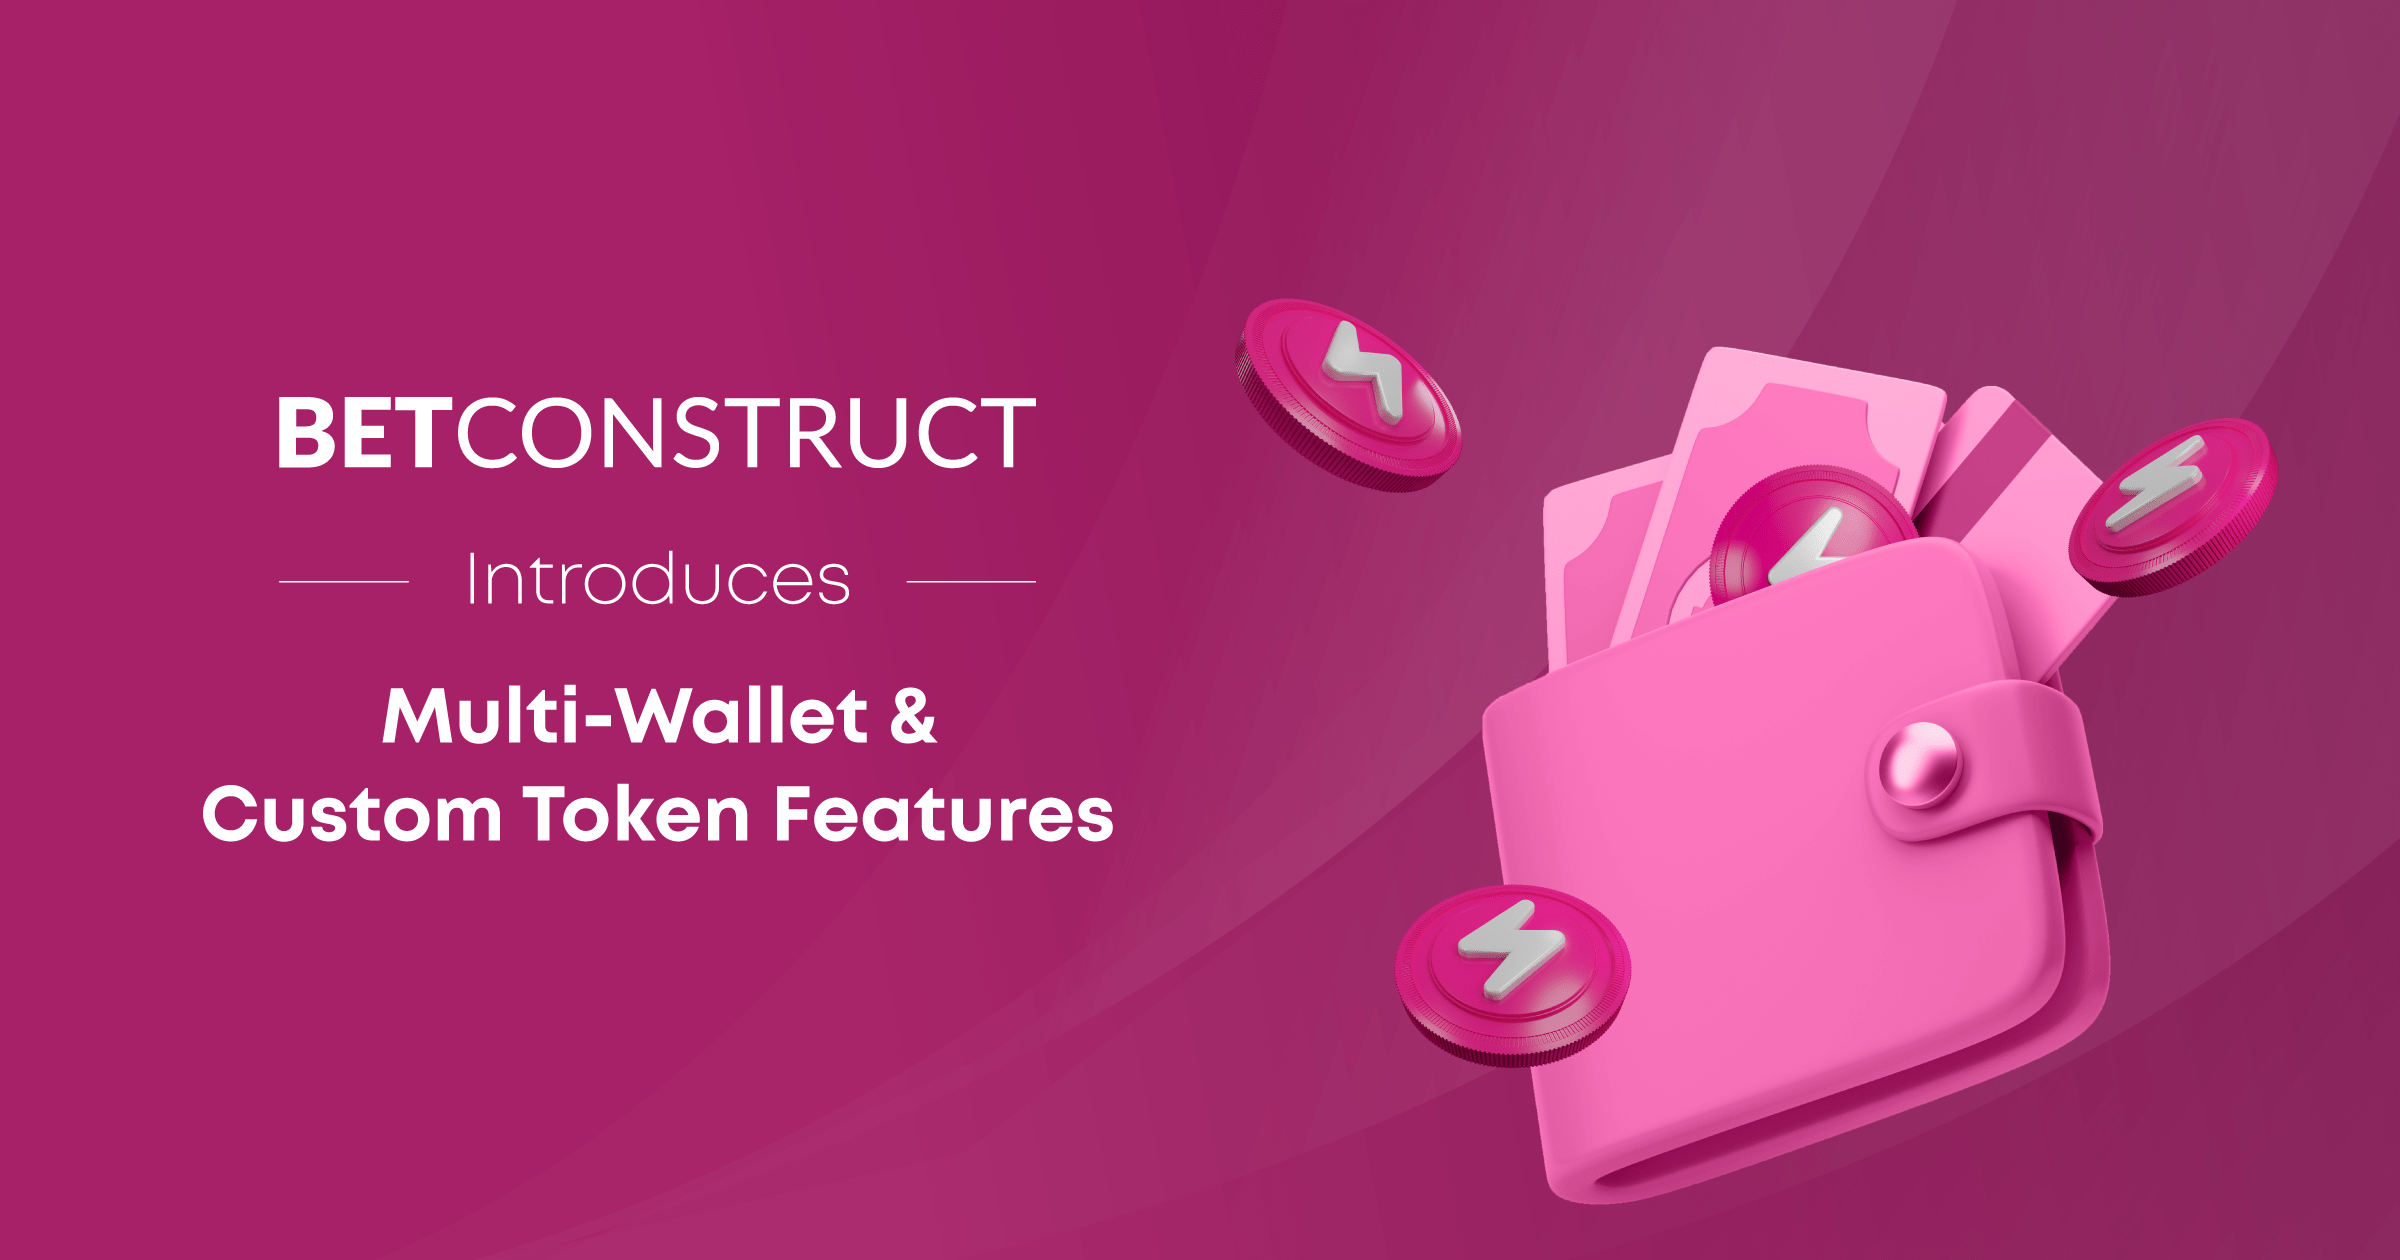 betconstruct-introduces-new-possibilities-with-multi-wallet-&-custom-token-features